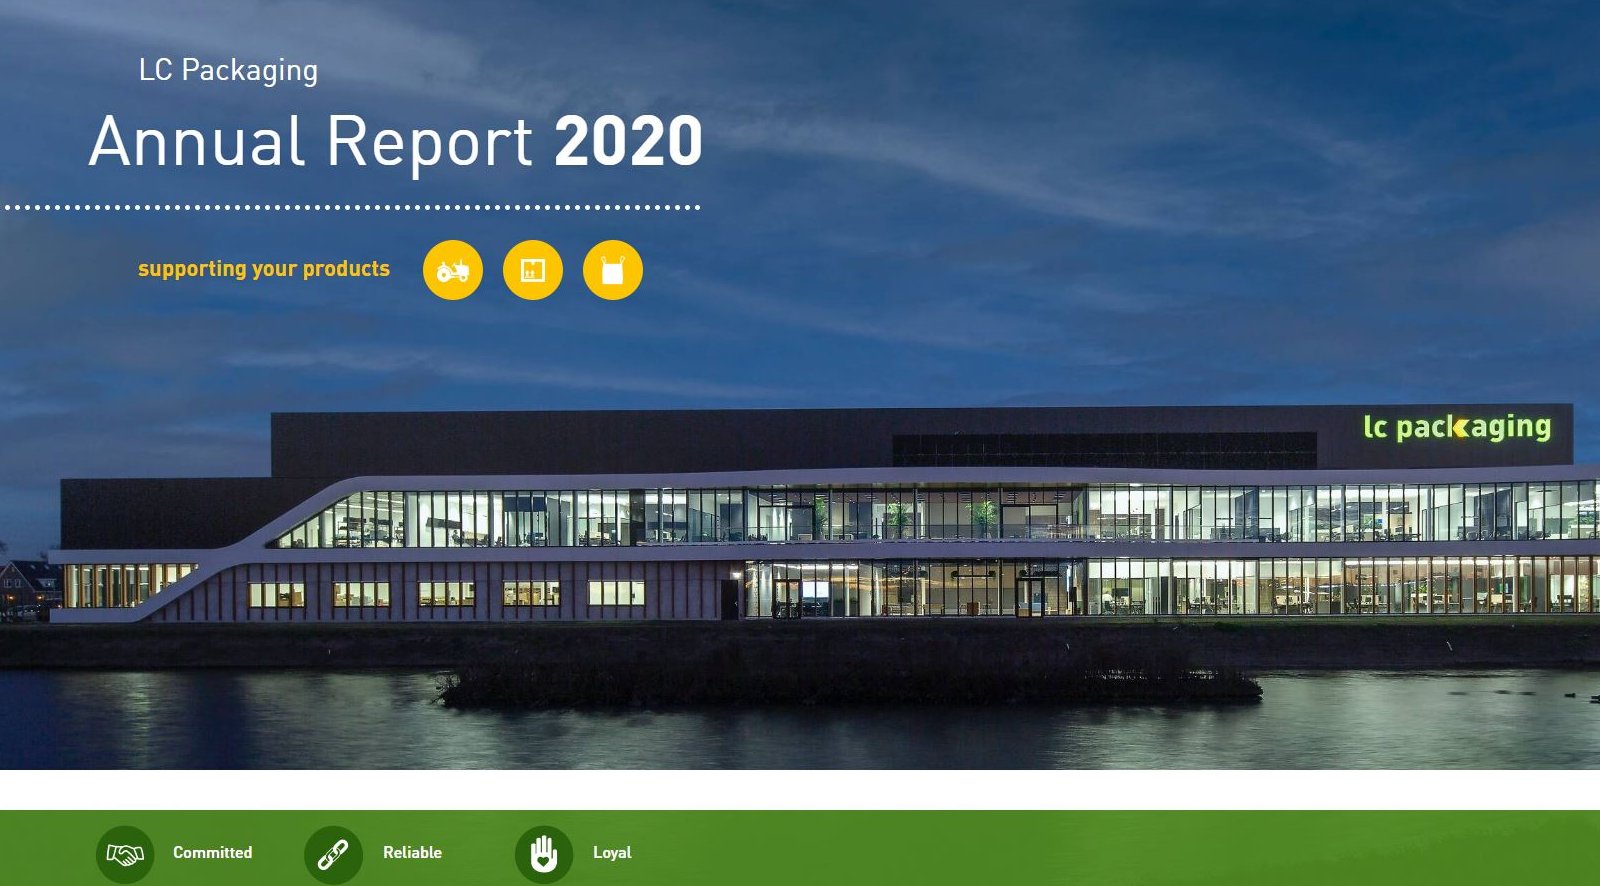 Annual Report 2020 cover.JPG